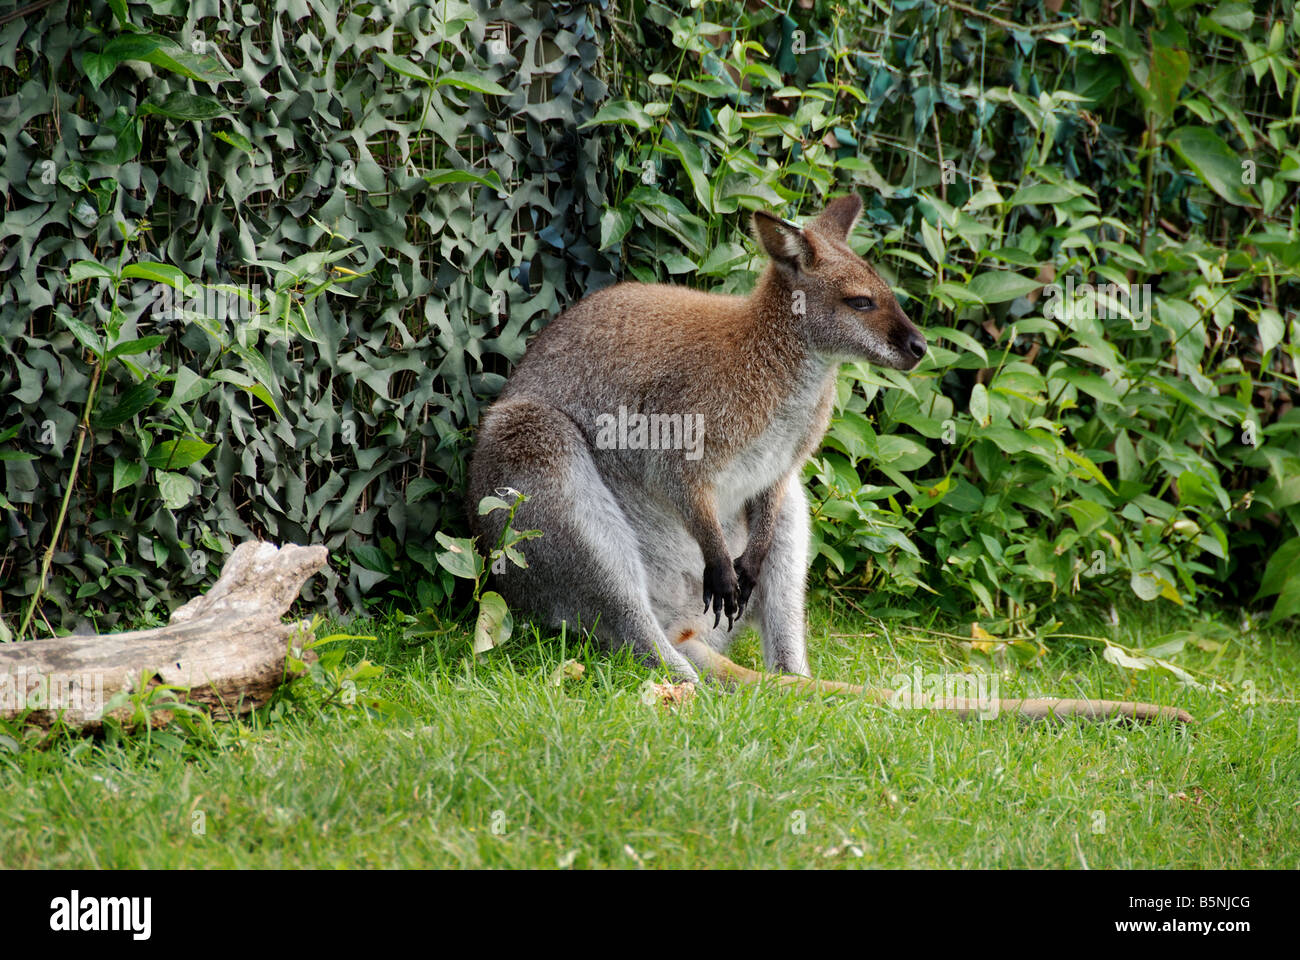 A wallaby Macropus agilis leaning against a fence Stock Photo